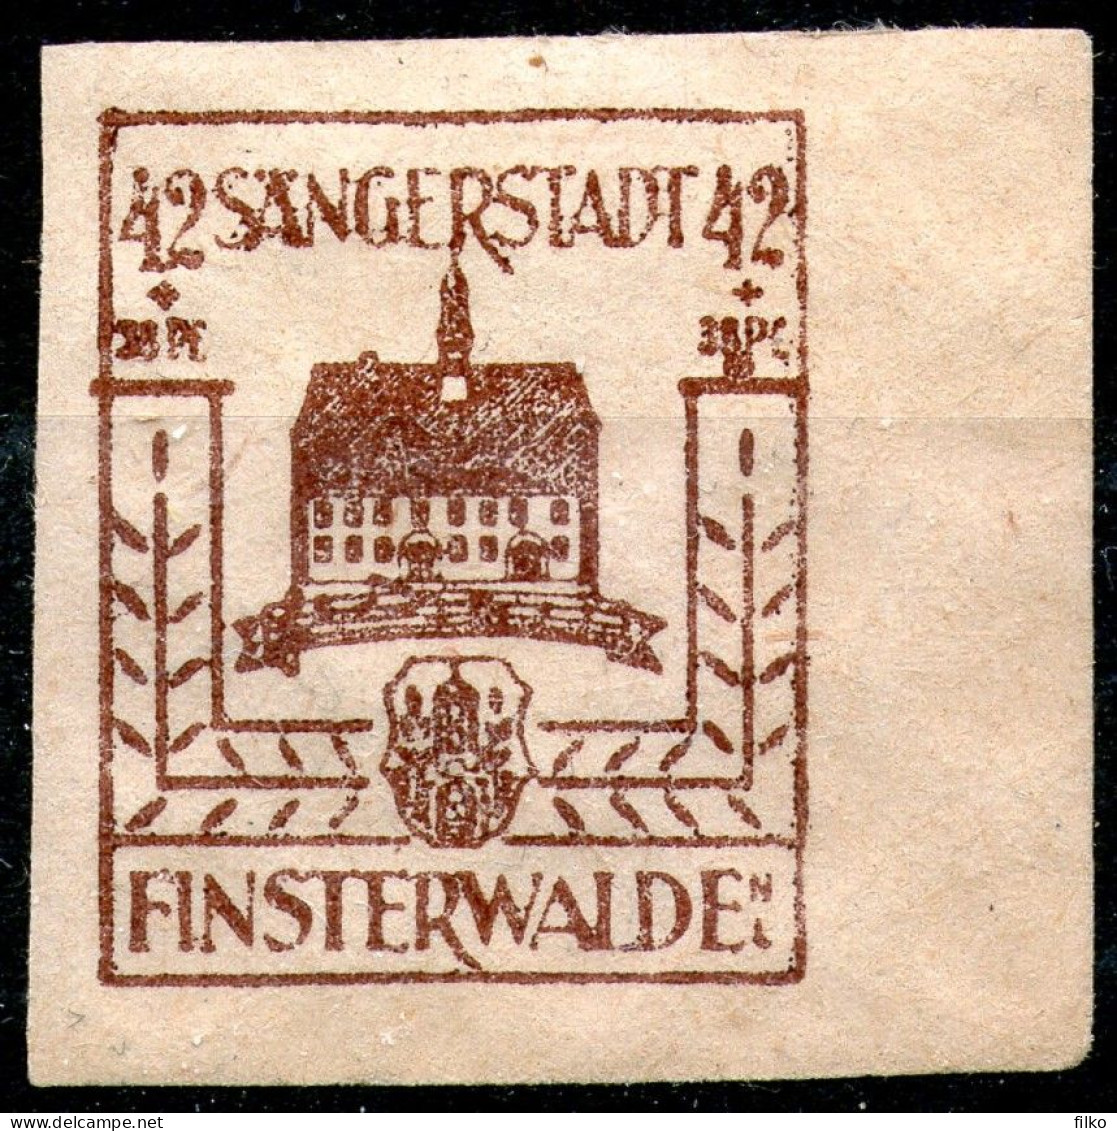 Germany,Finsterland Distrct Local Post,MLH *,as Scan - Postfris